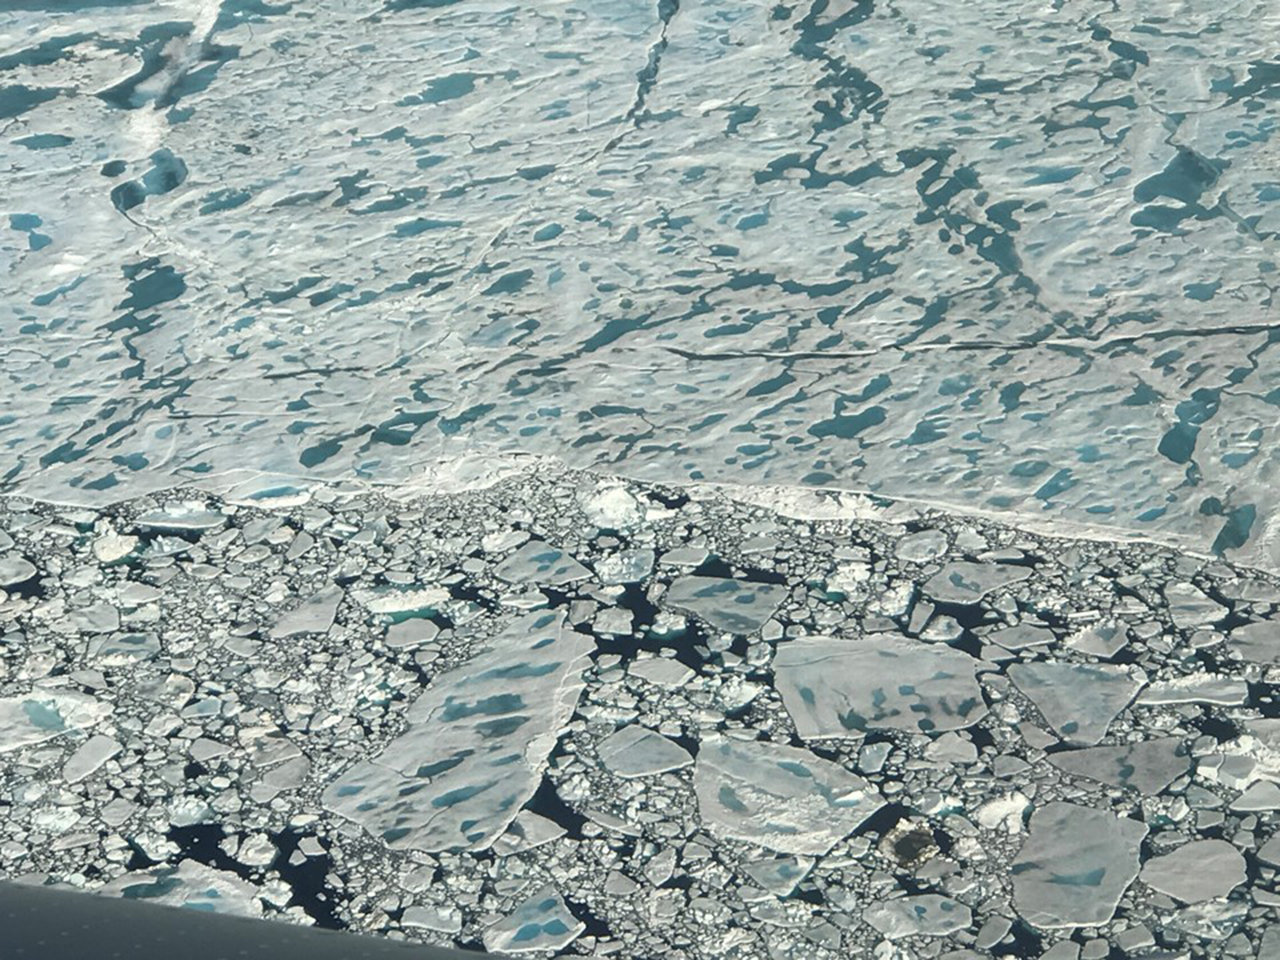 Many melt ponds on sea ice north of Greenland, as seen during an Operation IceBridge flight on July 24, 2017.